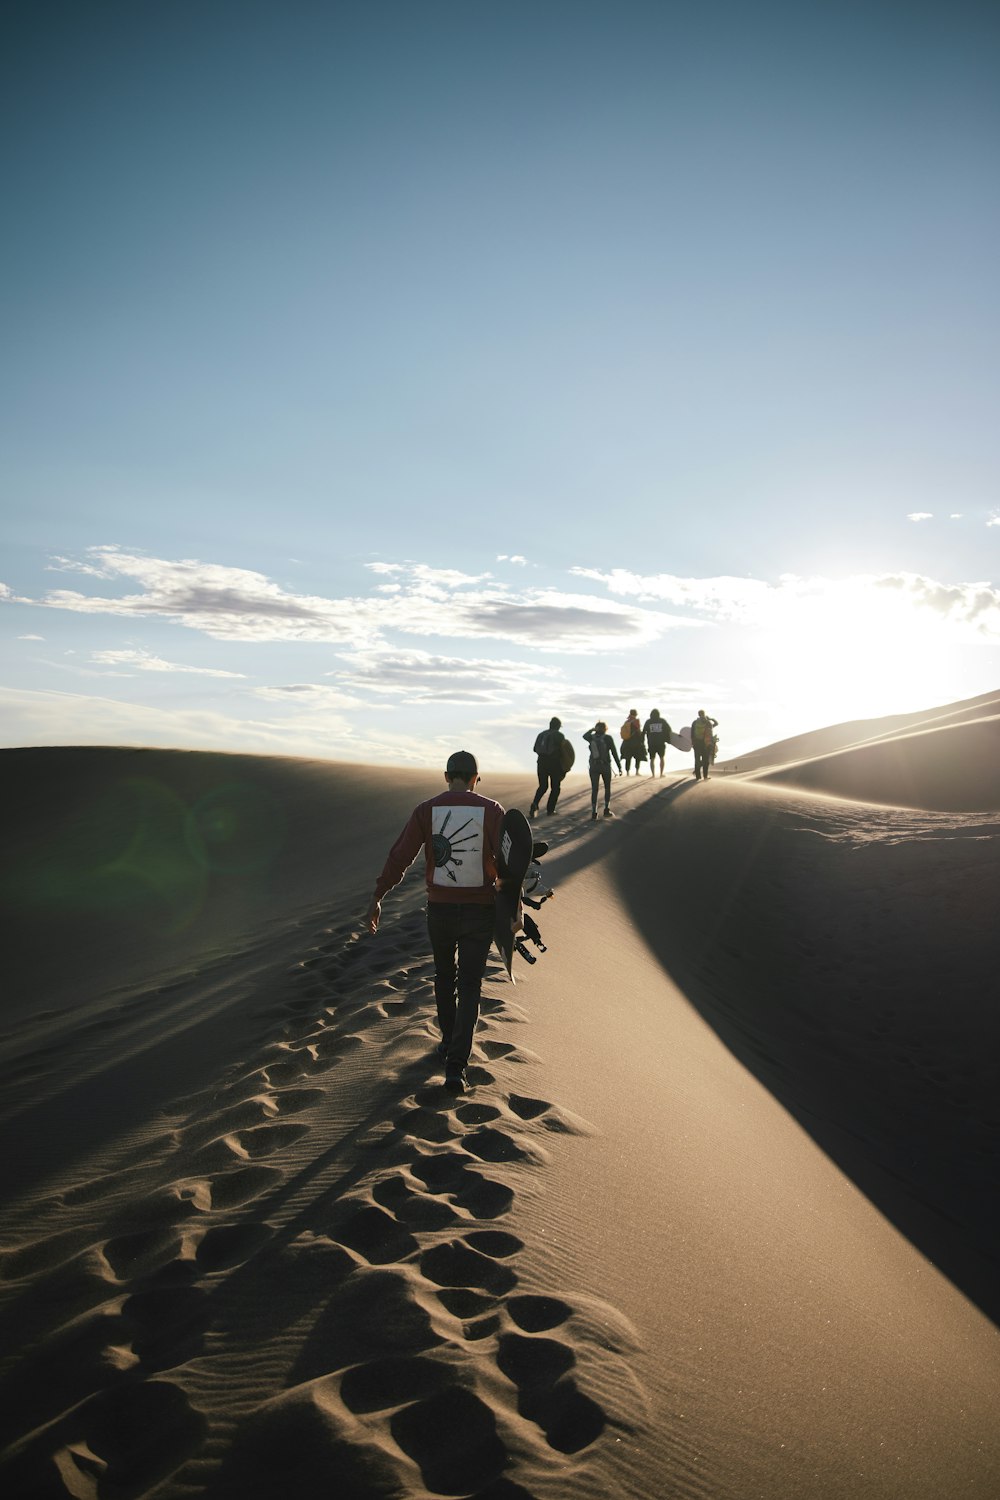 a group of people walking on a path in a desert